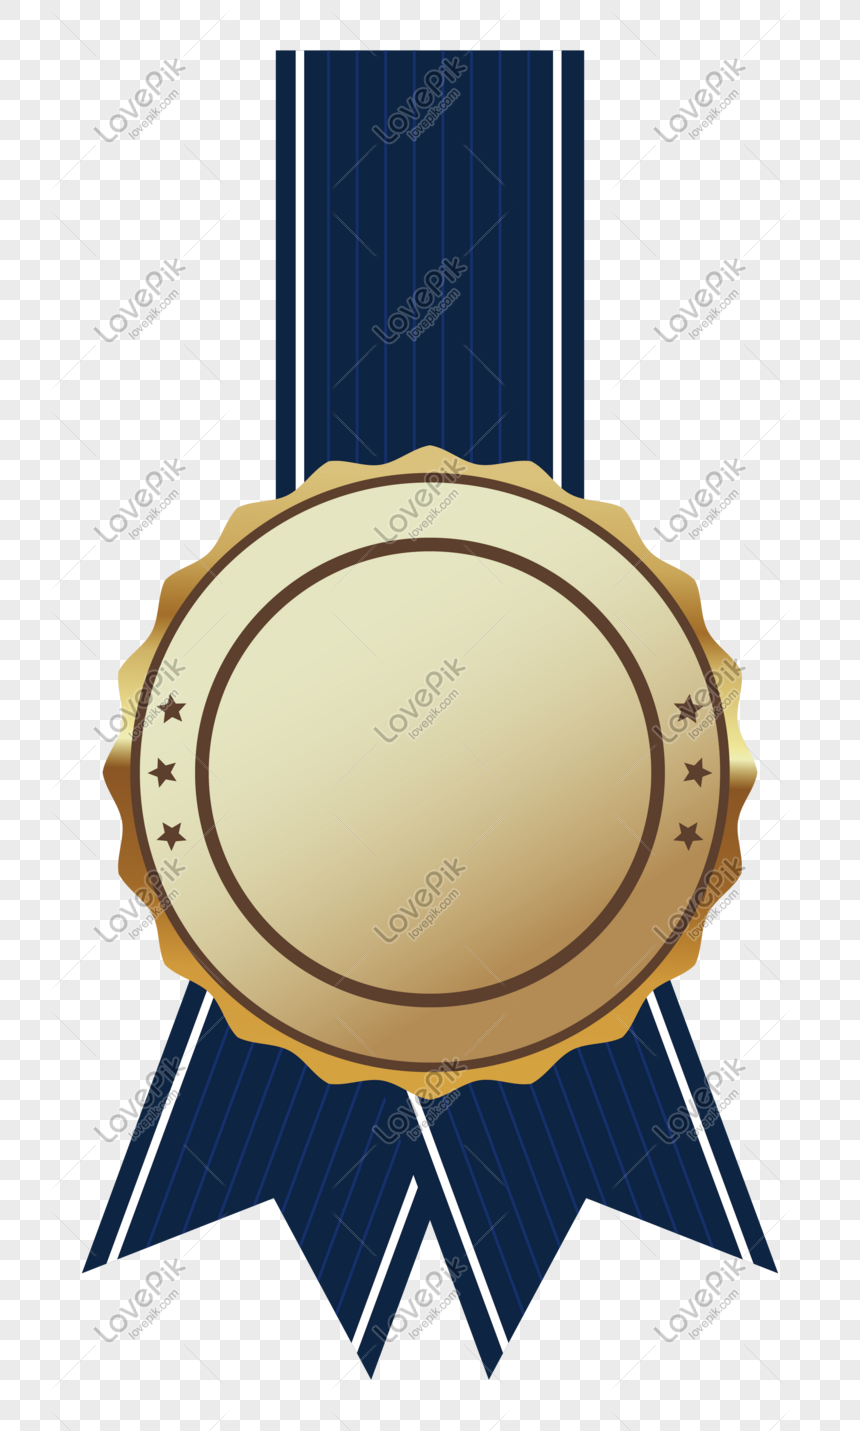 Download Certificate With Vector Blank Blue Striped Ribbon Medal Medal Fr Png Image Psd File Free Download Lovepik 611771994